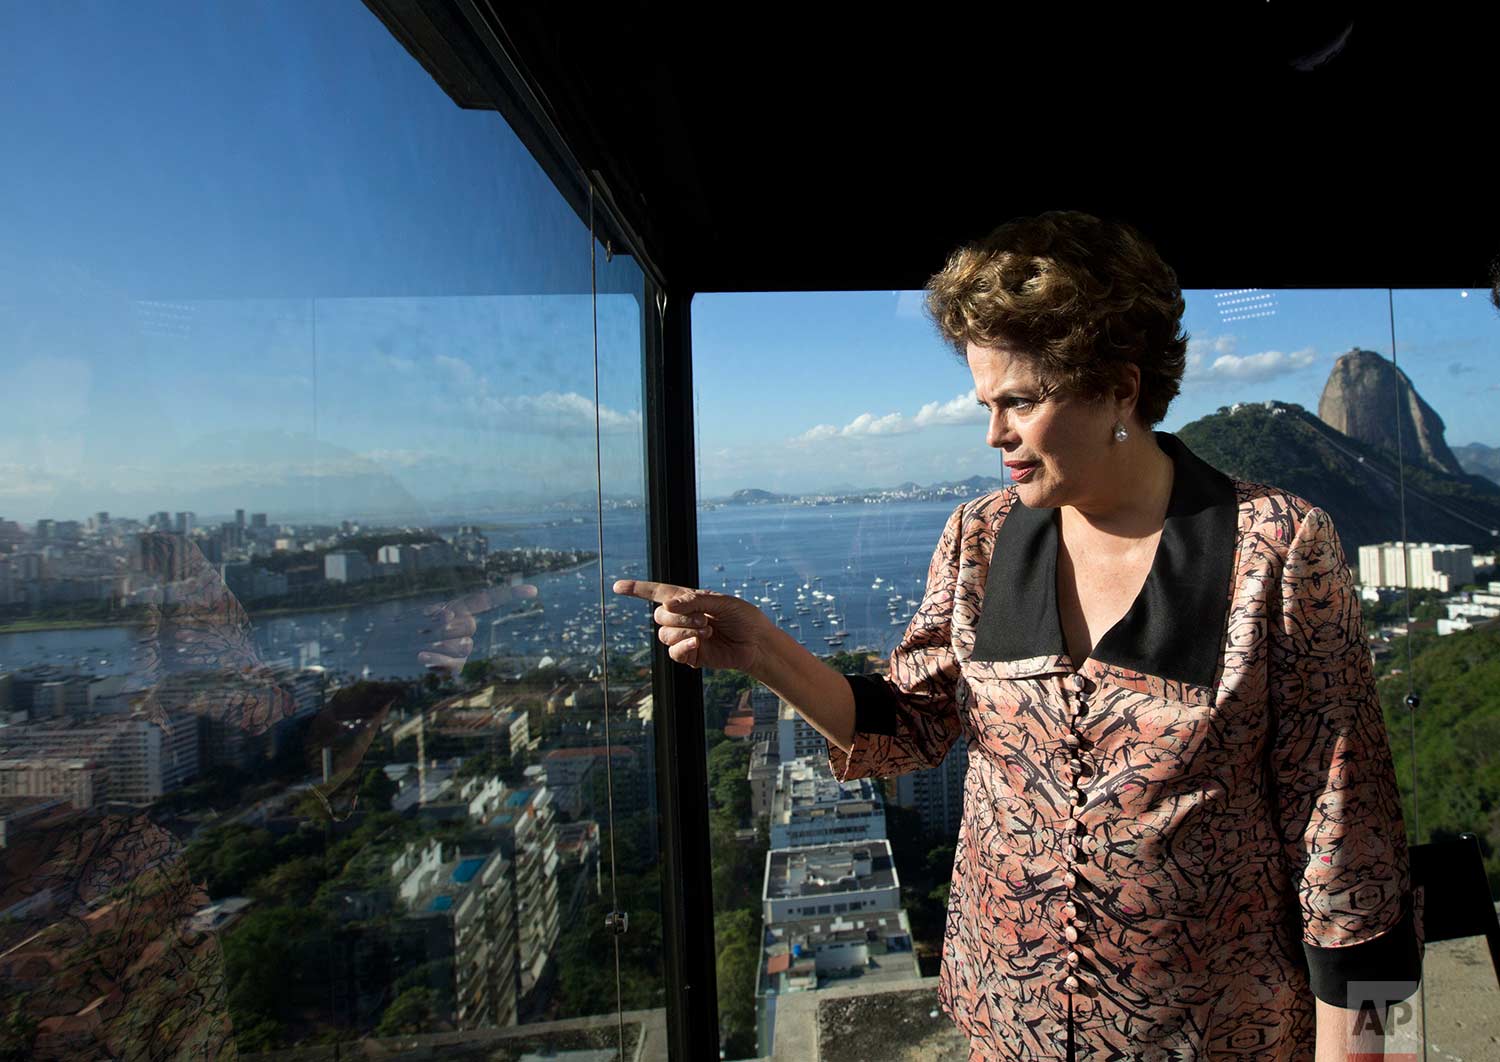 Brazil's former President Dilma Rousseff looks out over Guanabara Bay, before the start of an interview at the offices of the Associated Press in Rio de Janeiro, Brazil, Friday, July 14, 2017. (AP Photo/Silvia Izquierdo)